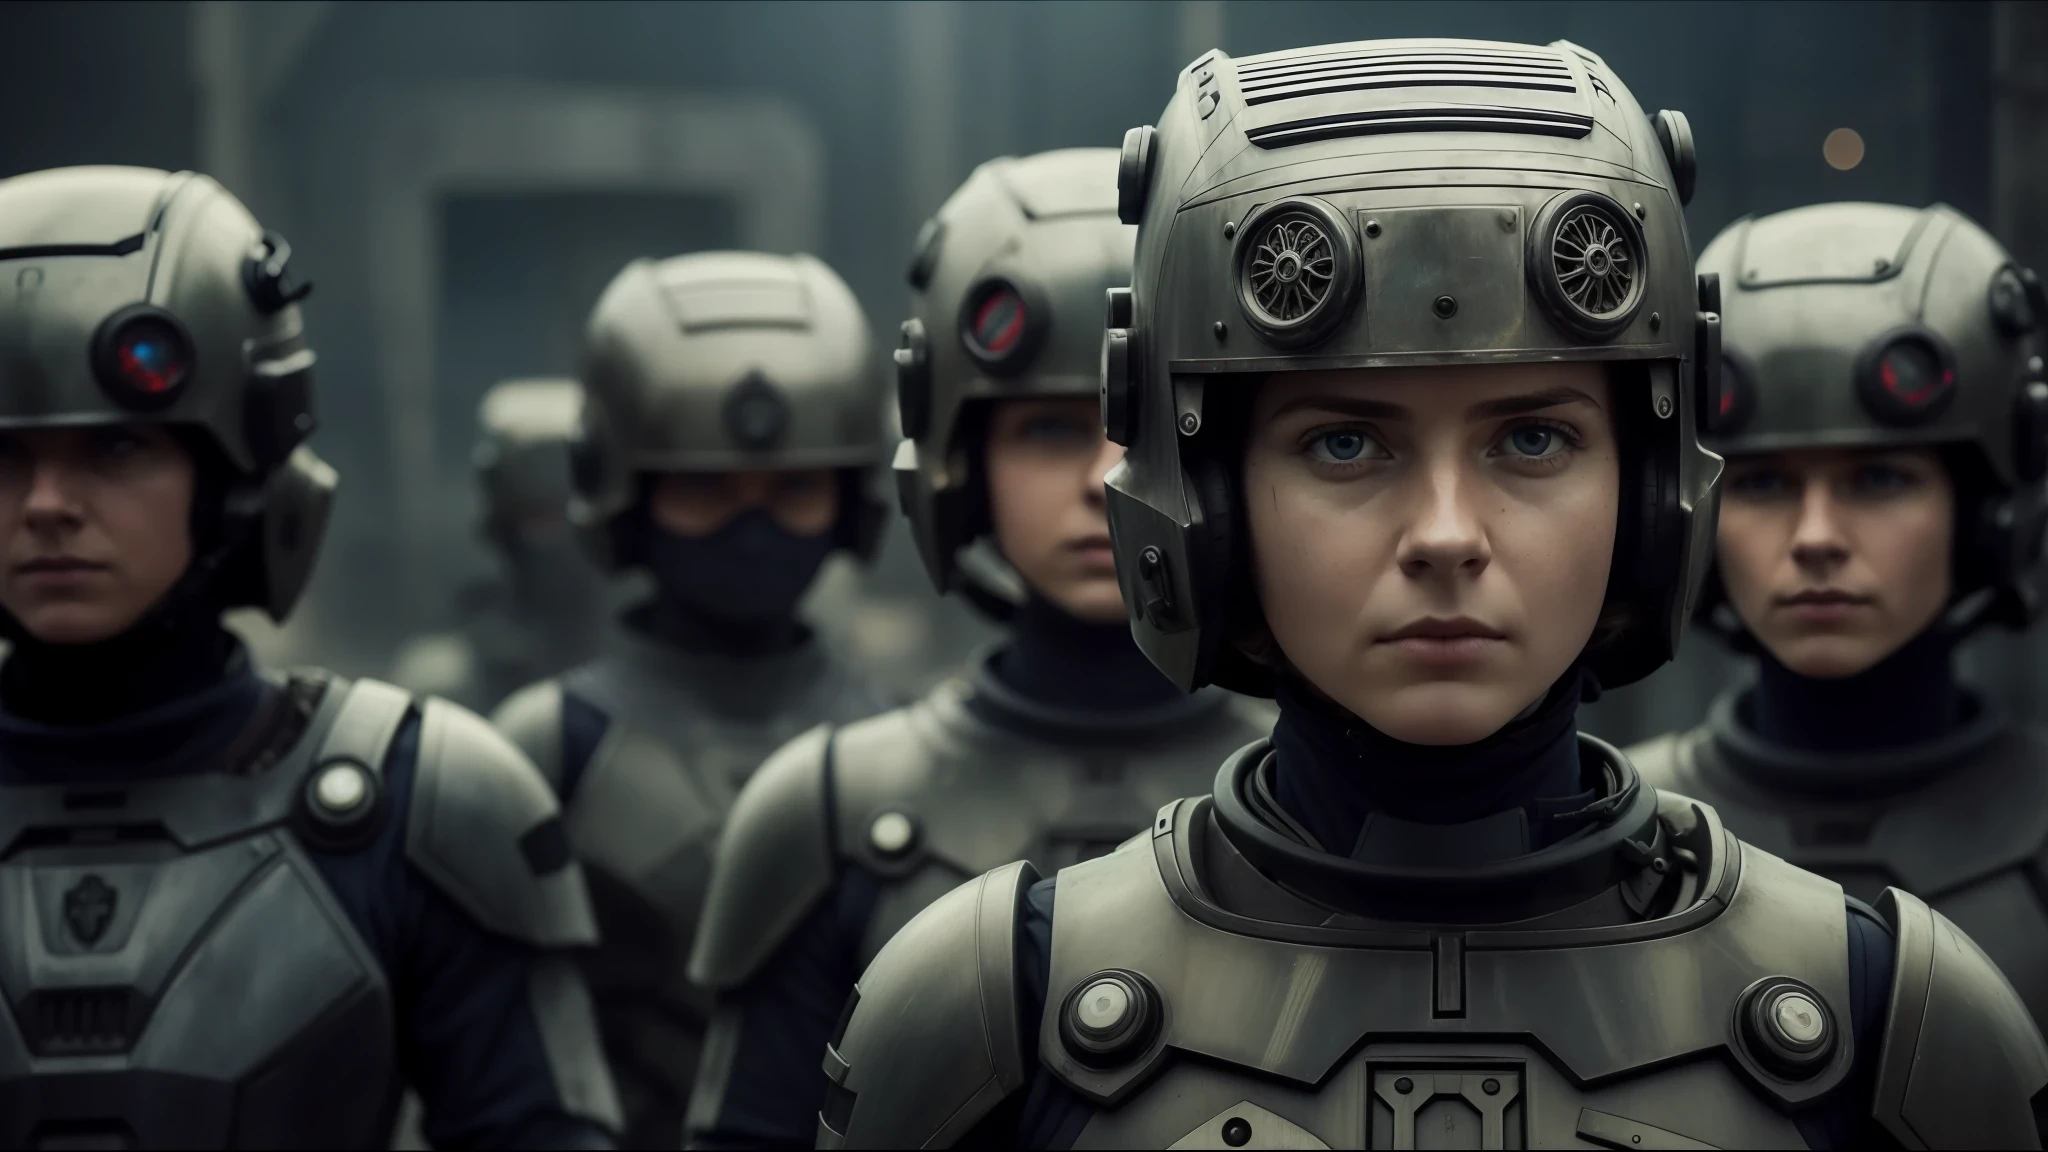 there are many people in futuristic suits with helmets on, style of seb mckinnon, cinematic stillframe, portrait of soldier girl, by Peter Madsen, workers, realistic mechanical details, corrected faces, production photo, by Władysław Podkowiński, matriarchy, zdzidaw